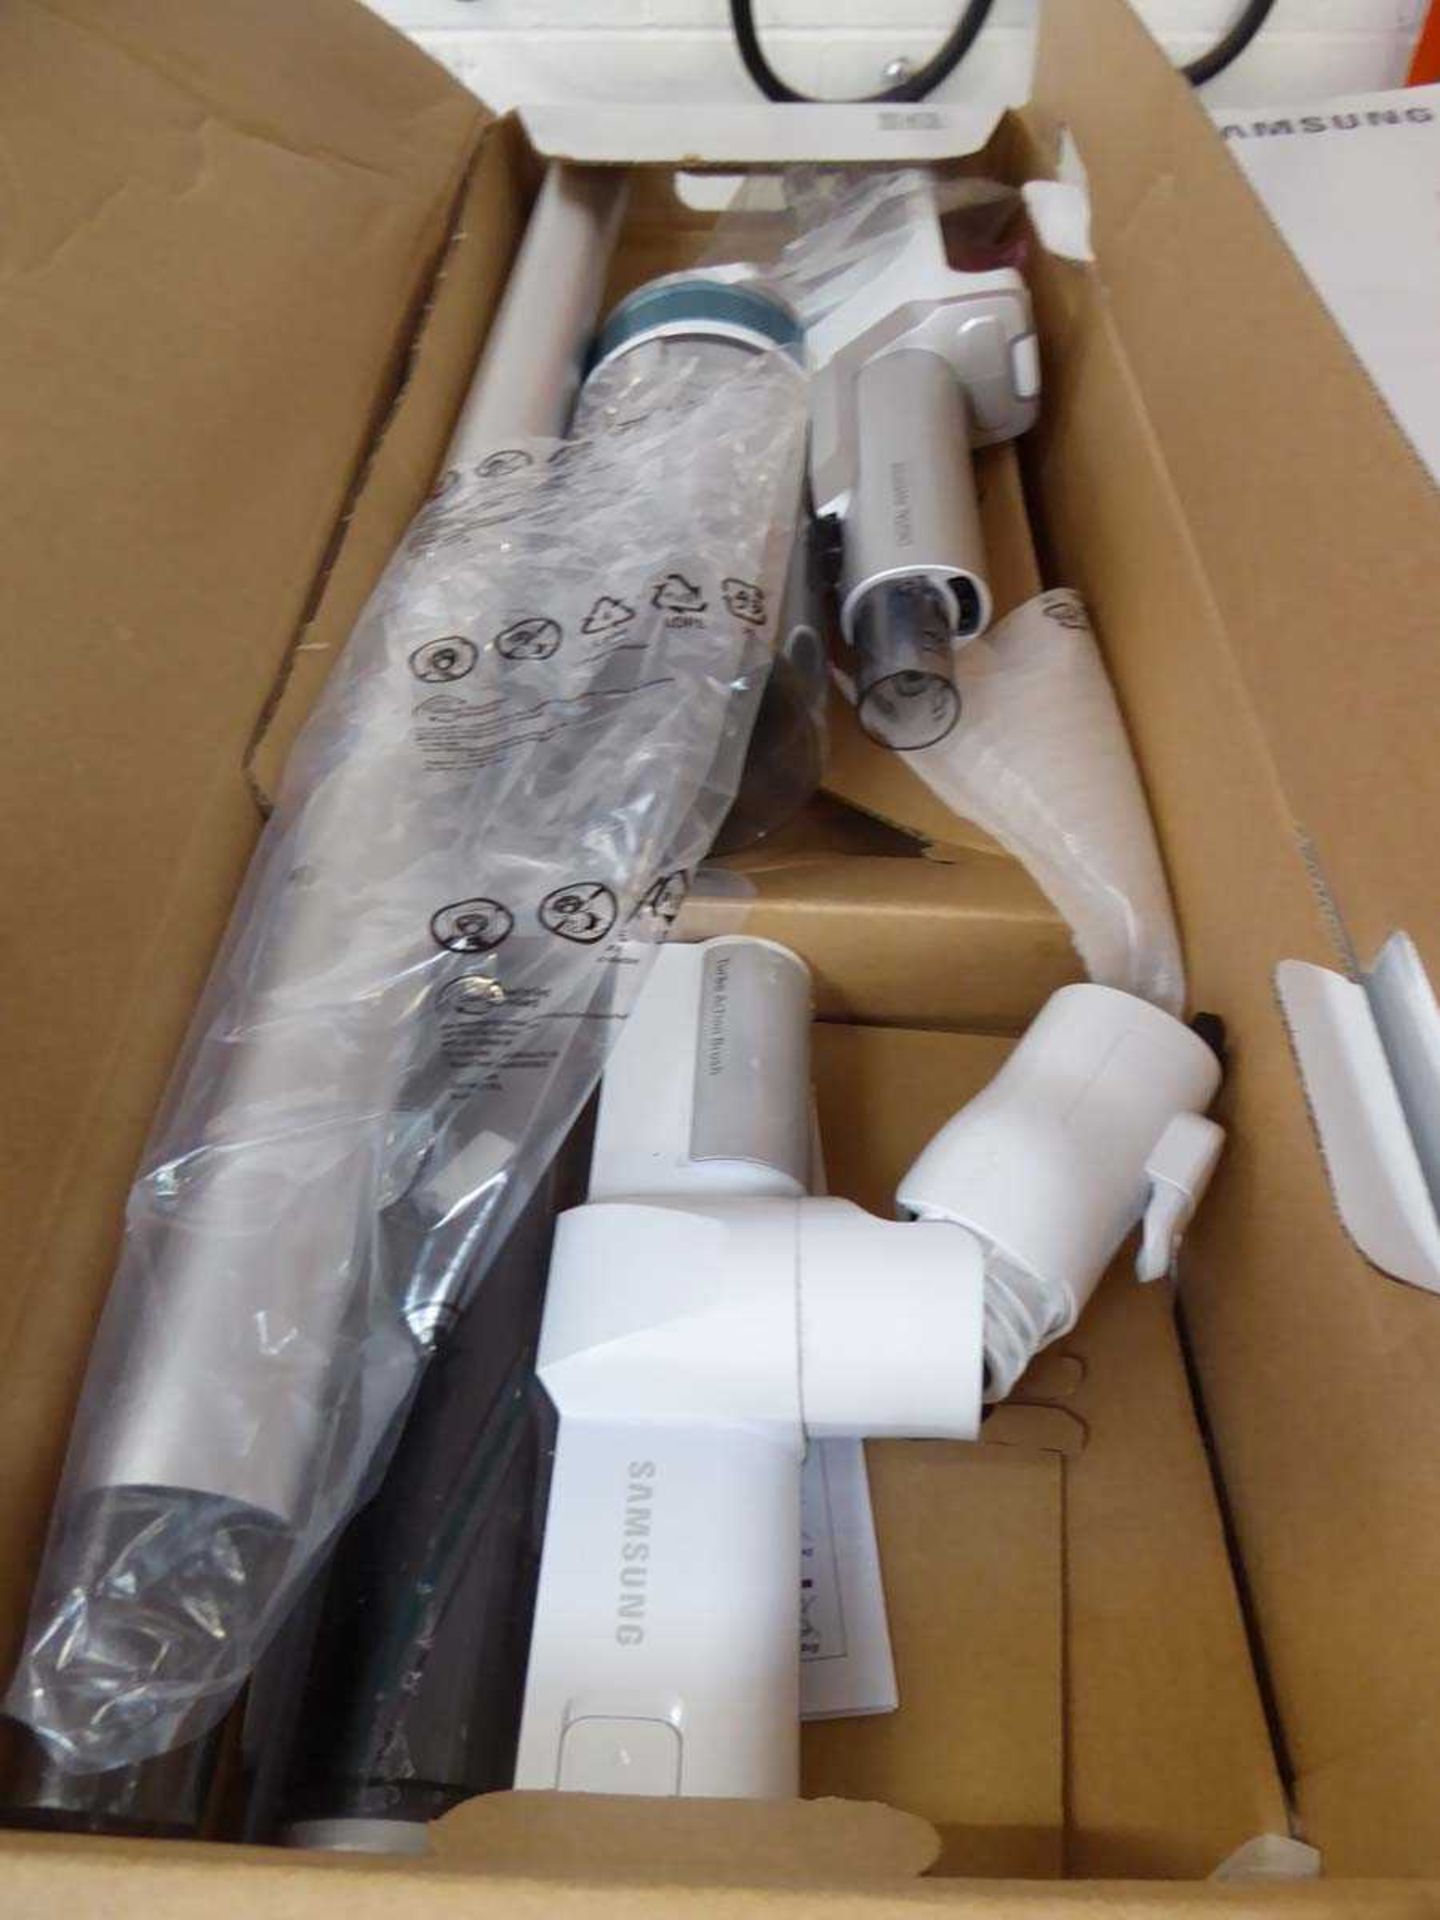 +VAT Samsung Jet 70 Series cordless stick vacuum cleaner with battery, charger and accessories - Image 2 of 2